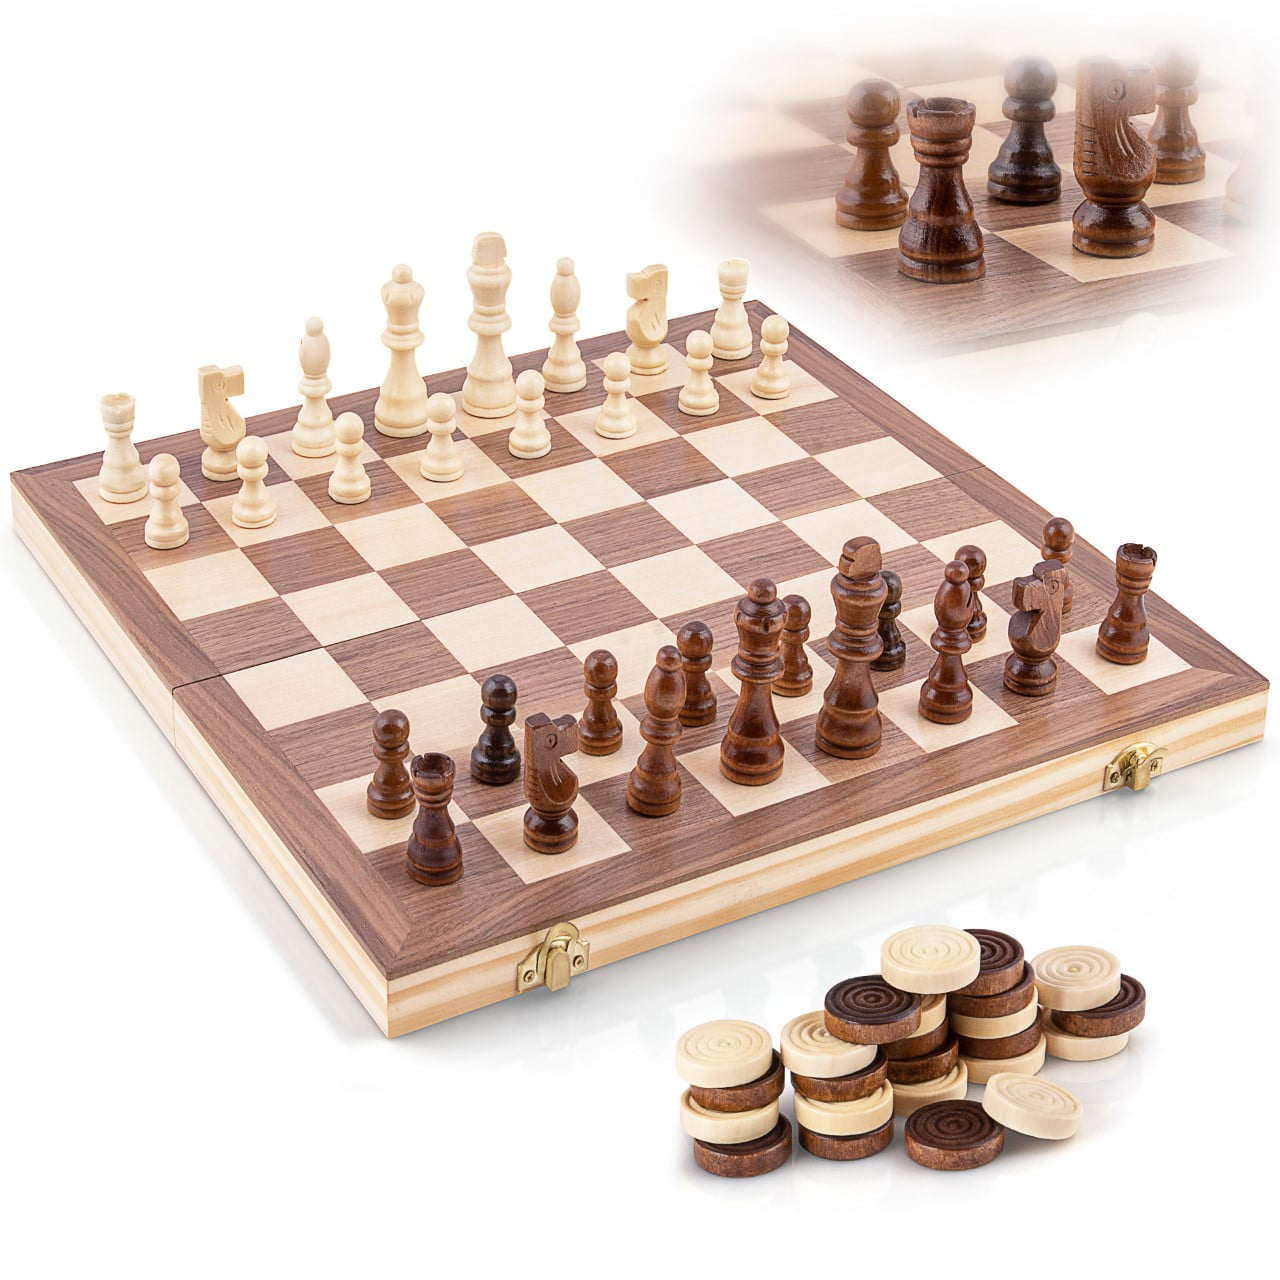 Foldable Wood Chess Wooden Board Hand Crafted Folding Chessboard Game Portable